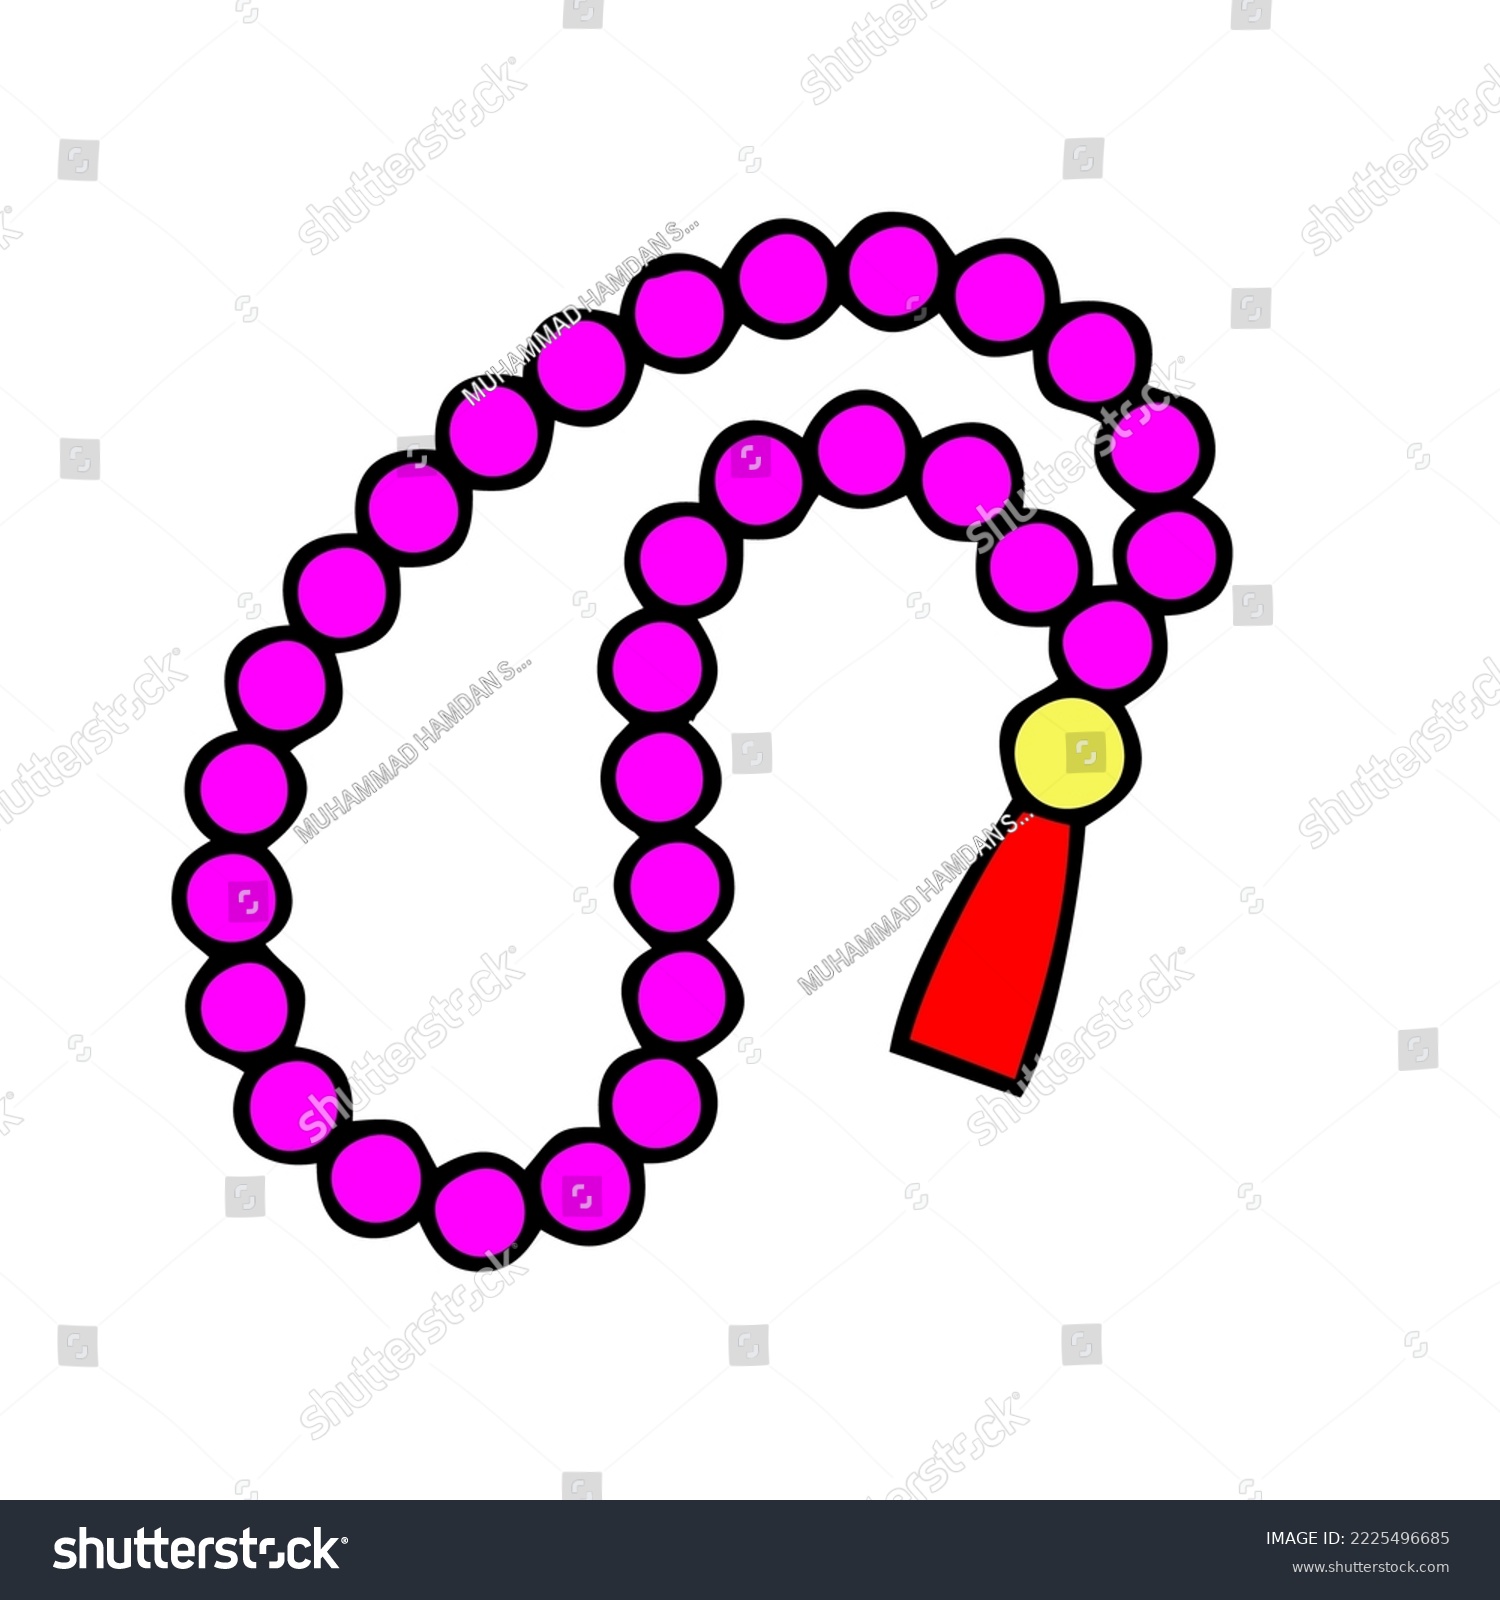 SVG of Tasbih is a tool that is generally made of wood, but there are also tasbih seeds made of olive seeds which are used as a tool to count the number of Dhikr numbers. svg